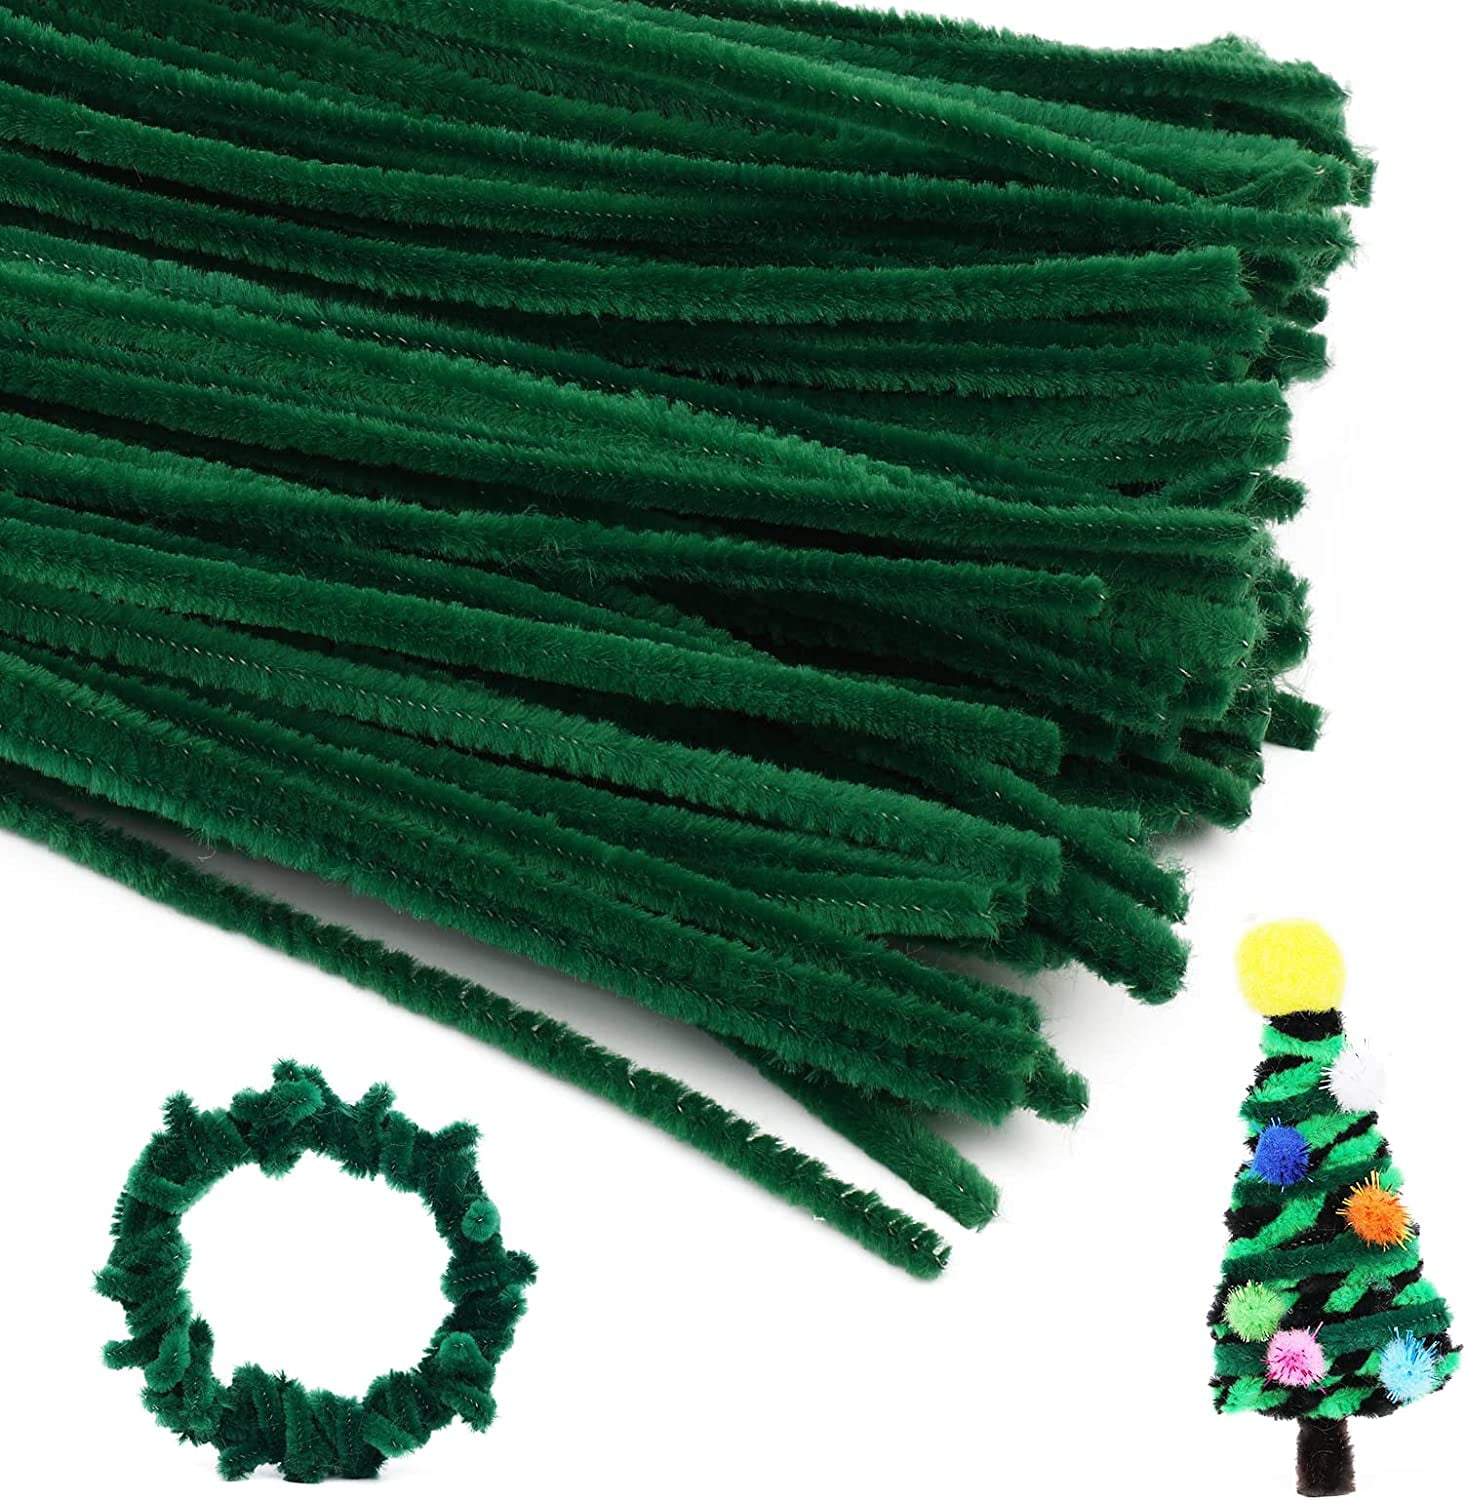  200PCS Pipe Cleaners Craft Supplies, Fluorescent Green  Chenille Stems Craft Pipe Cleaners Bulk For DIY Art And Craft Projects And  Christmas Decorations, 12inch X 6mm